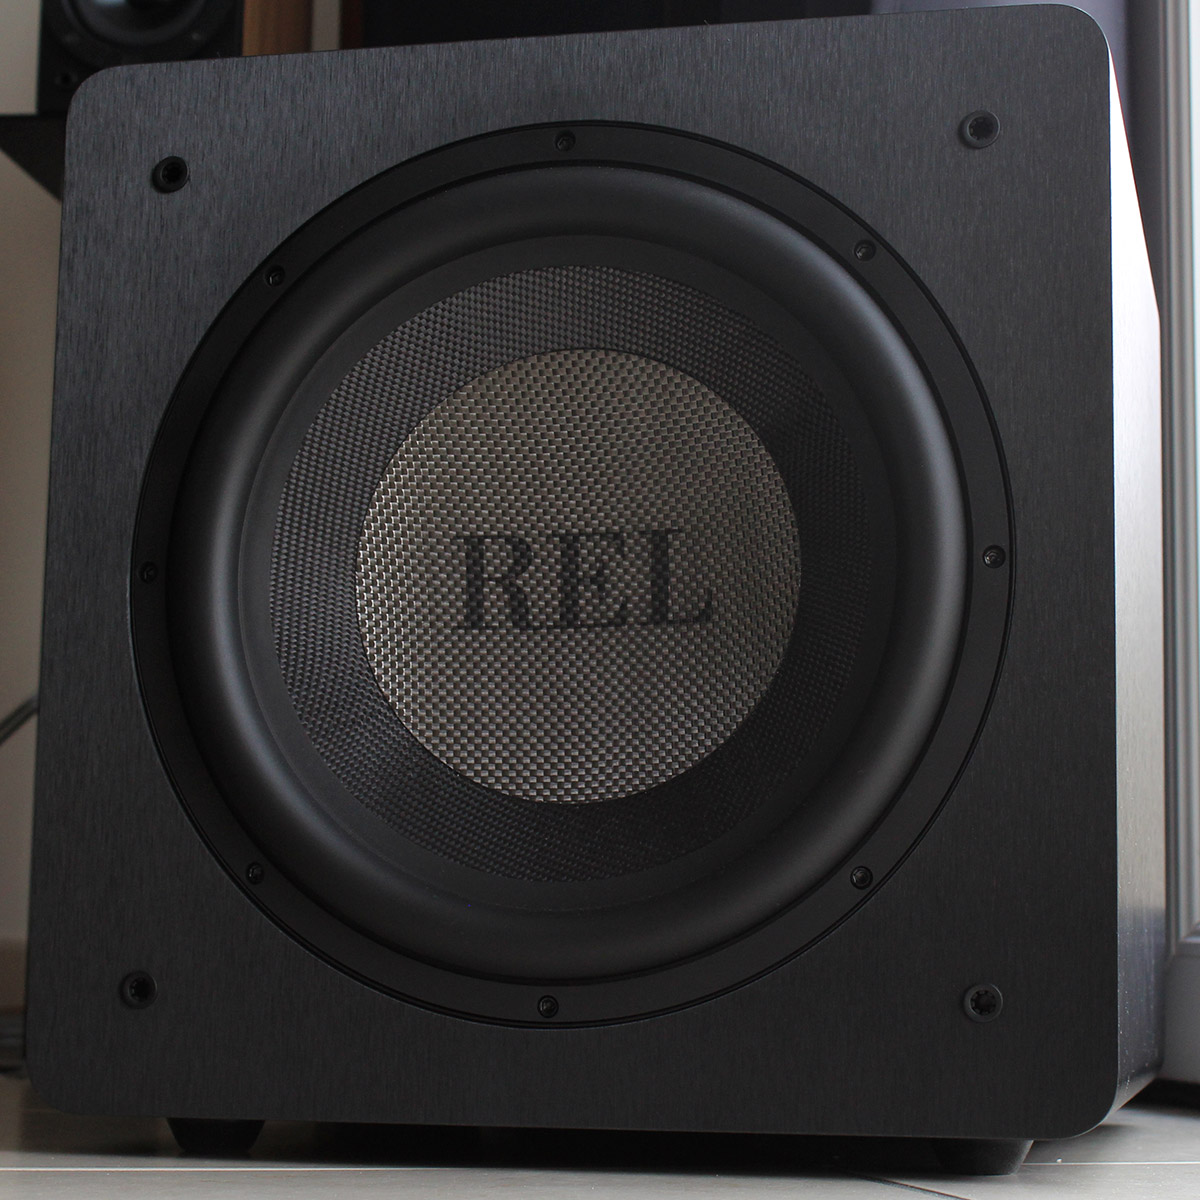 Rel Acoustics HT/1205 review: a subwoofer designed for home theaters and  gaming - Son-Vidéo.com: blog